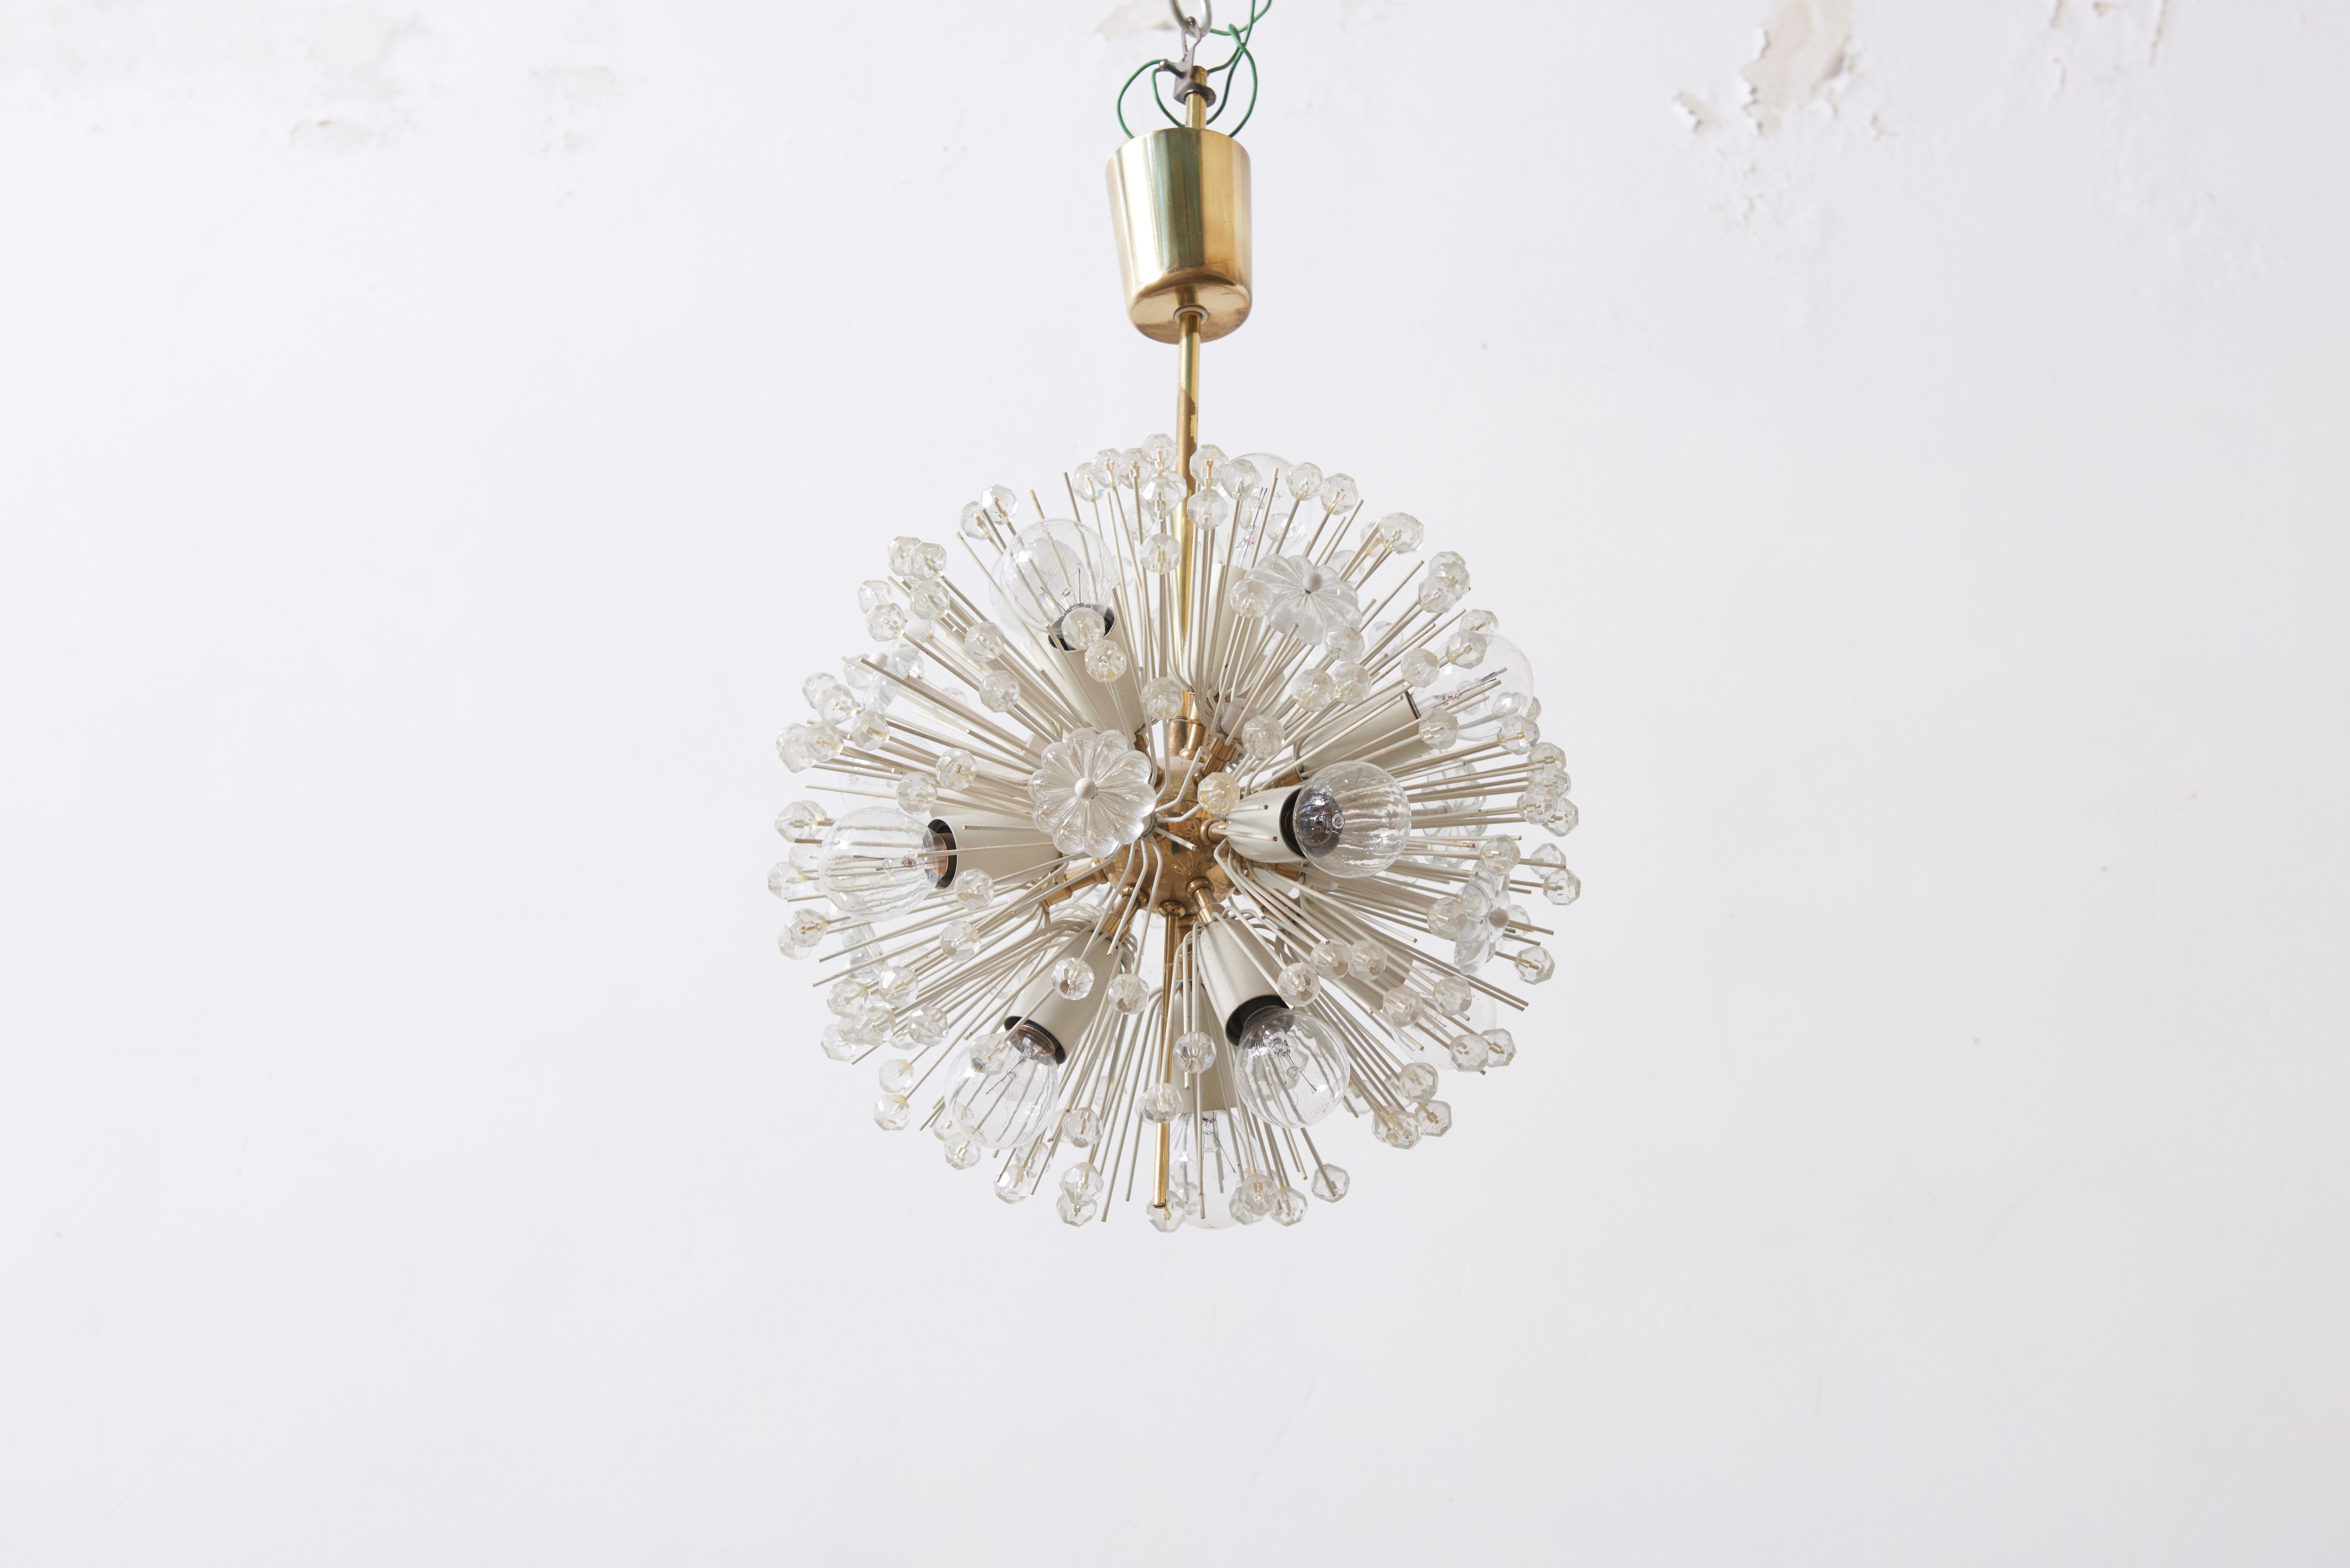 Glass and brass chandelier by Emil Stejnar for Rupert Nikoll, 1950s extra small version of a sputnik chandelier with molded glass flowers and stars.
Due to its compactness and smallness, the accent of light and glass is emphasized in this